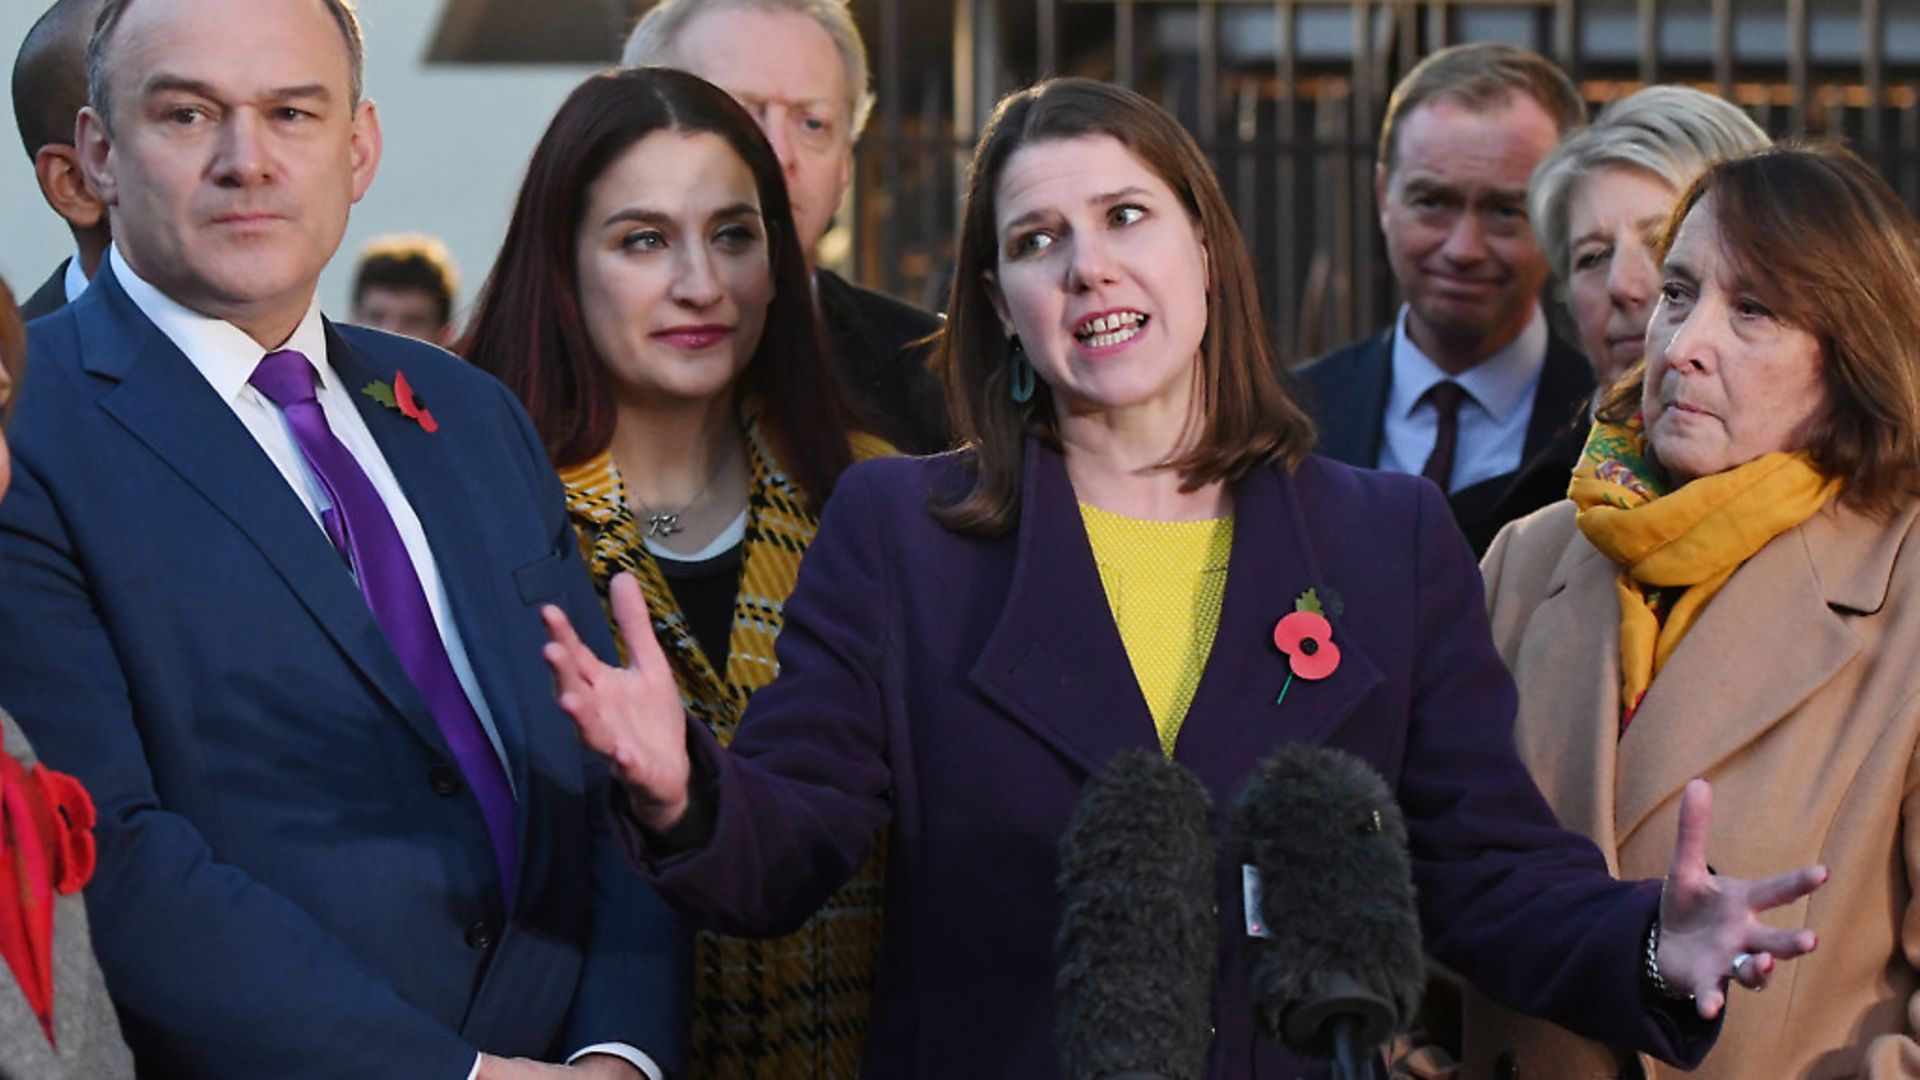 Leader of the Liberal Democrats Jo Swinson speaking to the media outside Houses of Parliament in London. Photograph: Stefan Rousseau/PA Wire. - Credit: PA